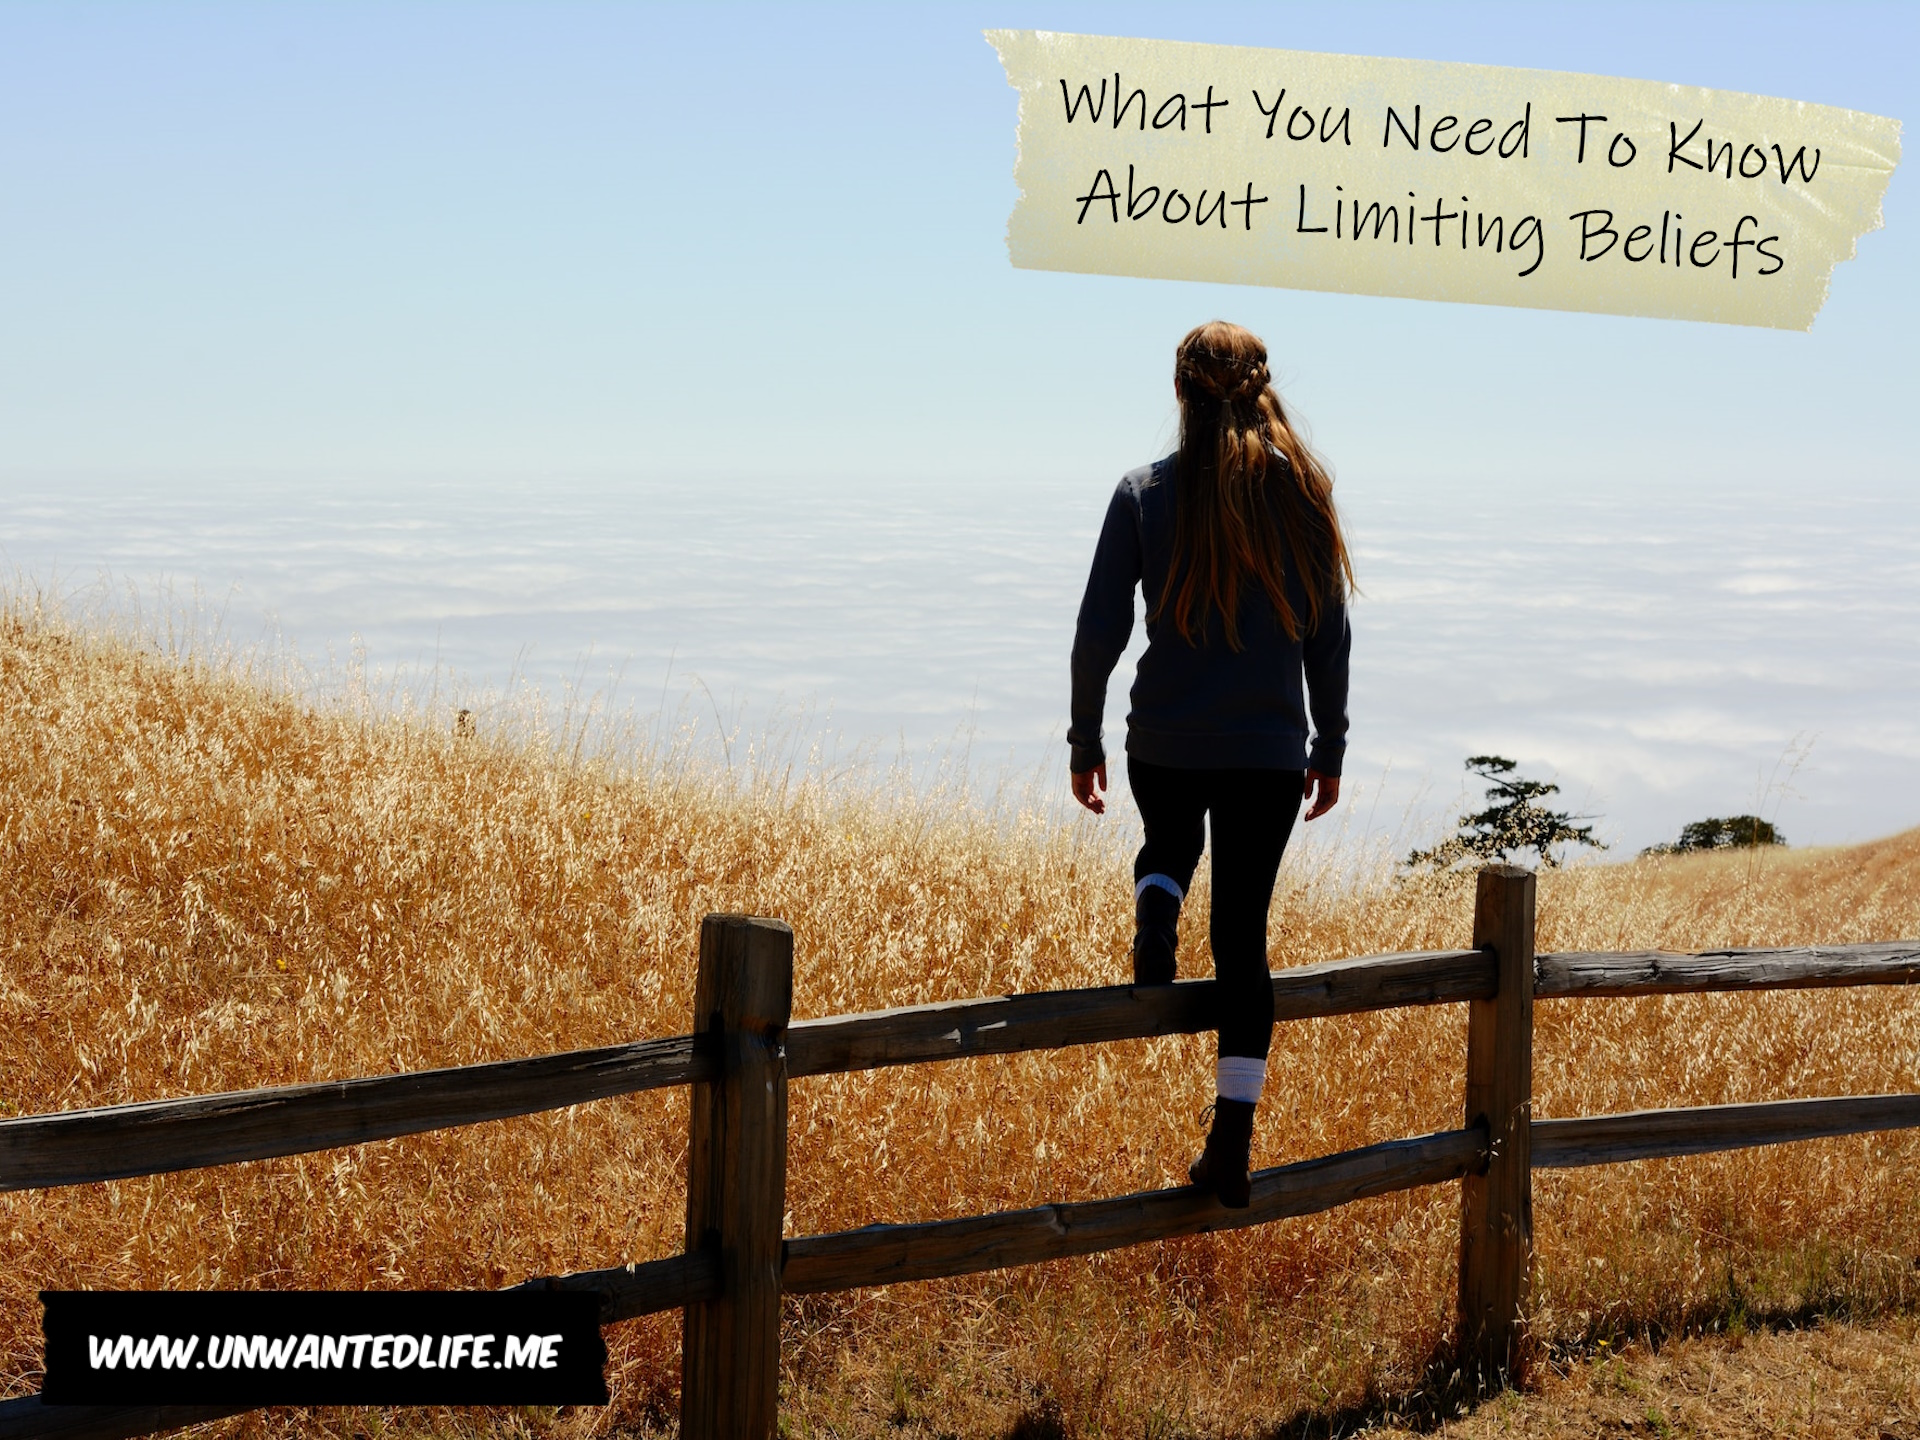 A photo of a woman stepping over a fence to represent the topic of the article - What You Need To Know About Limiting Beliefs